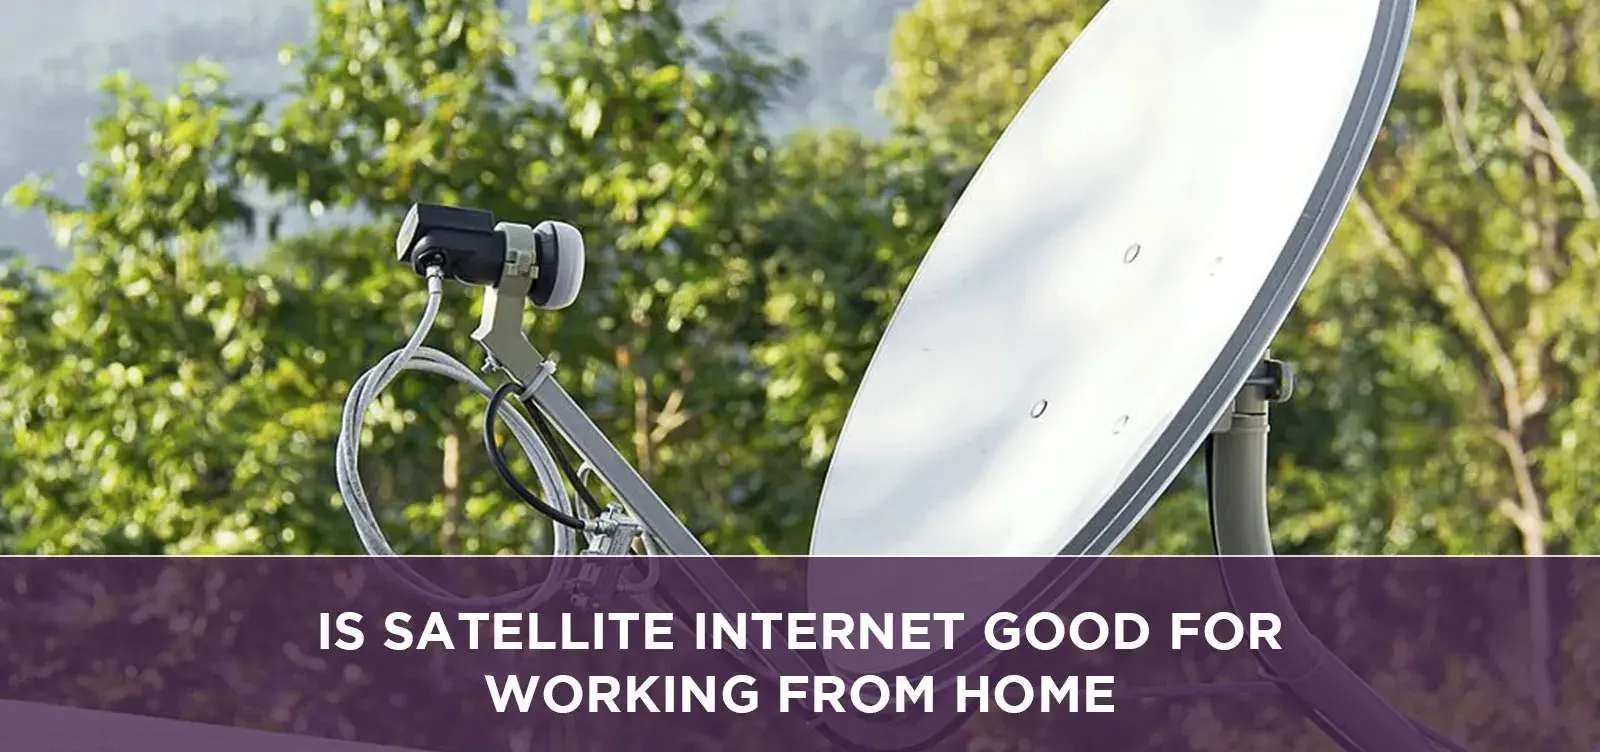 Is Satellite Internet Good For Working From Home?